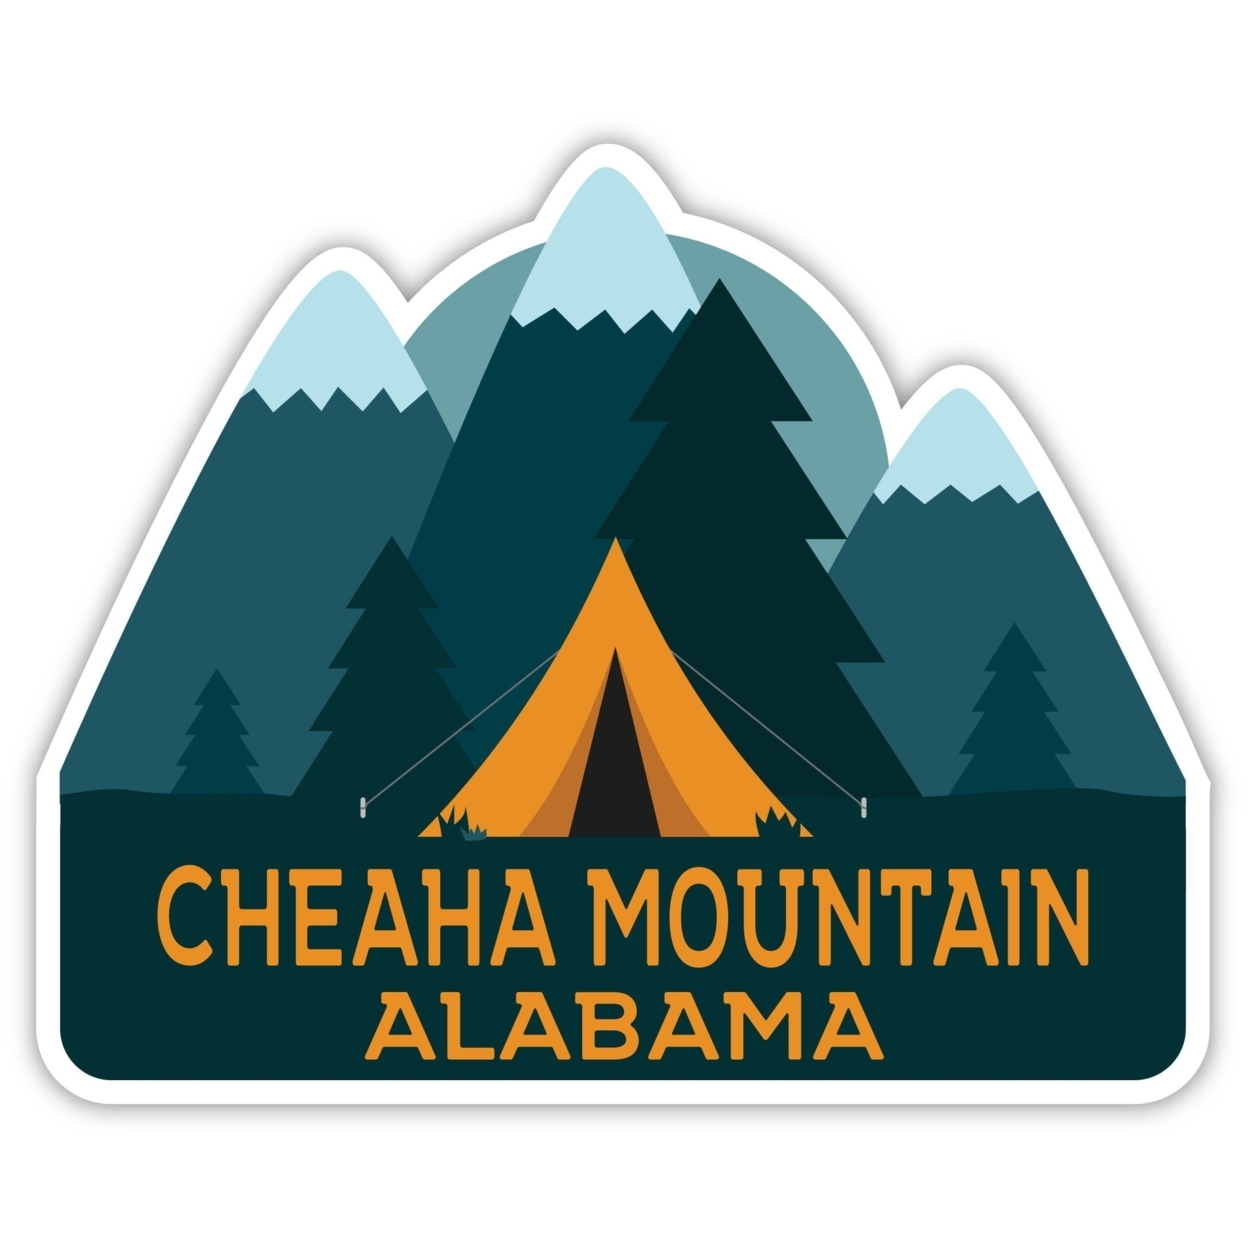 Cheaha Mountain Alabama Souvenir Decorative Stickers (Choose Theme And Size) - 4-Pack, 8-Inch, Tent